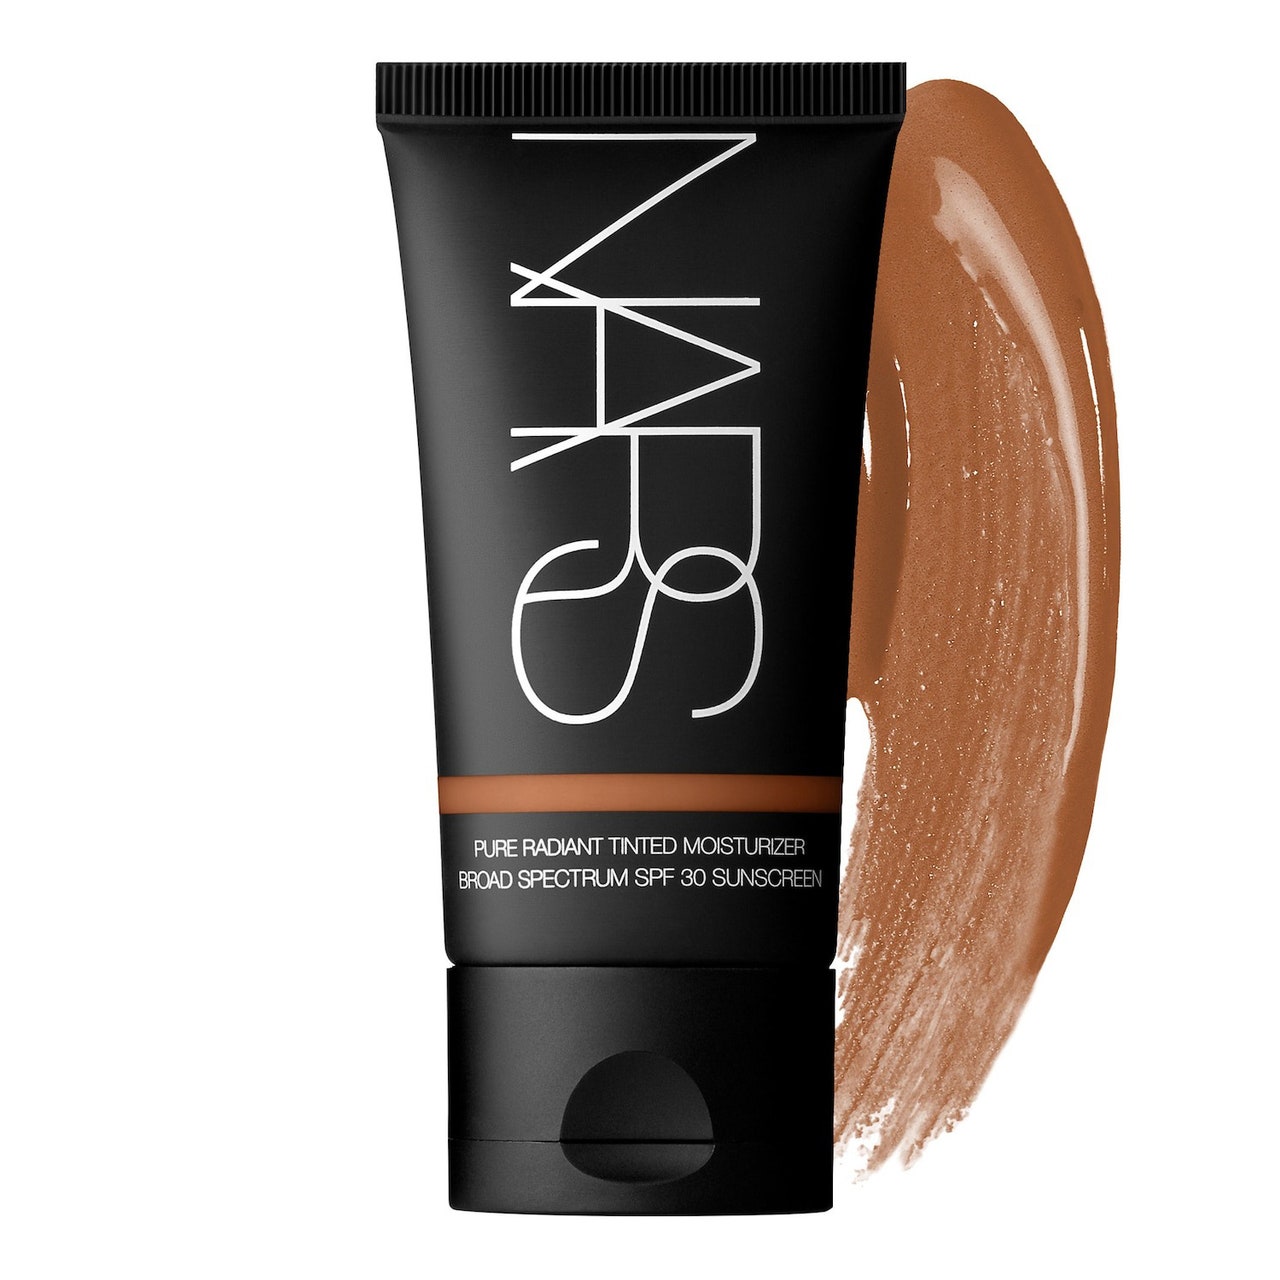 Nars Pure Radiant Tinted Moisturizer Broad Spectrum SPF 30 black tube with tinted moisturizer swatch on white background